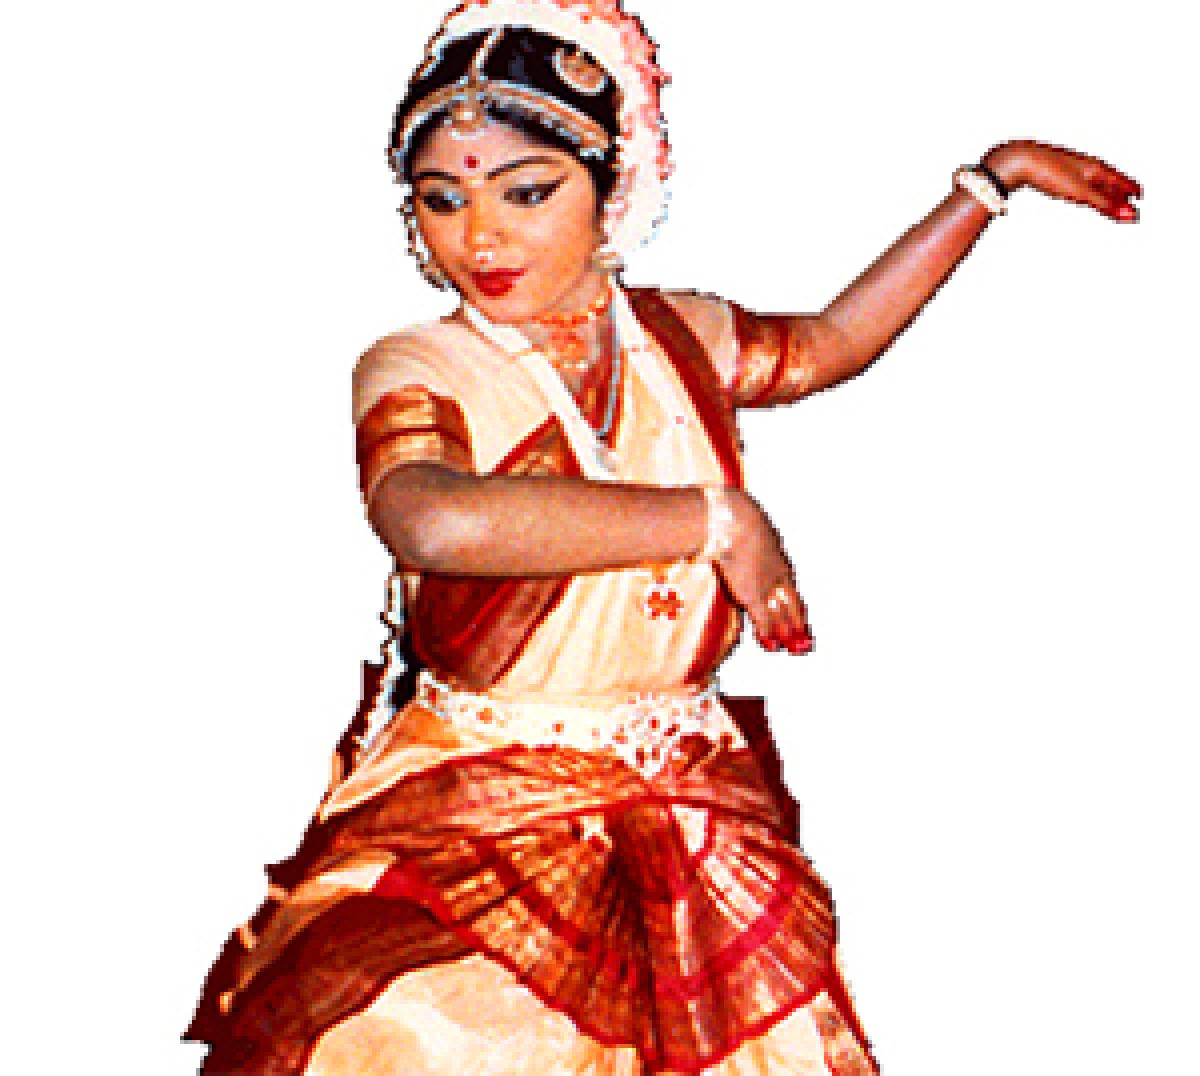 Costumes that go into Indian dances